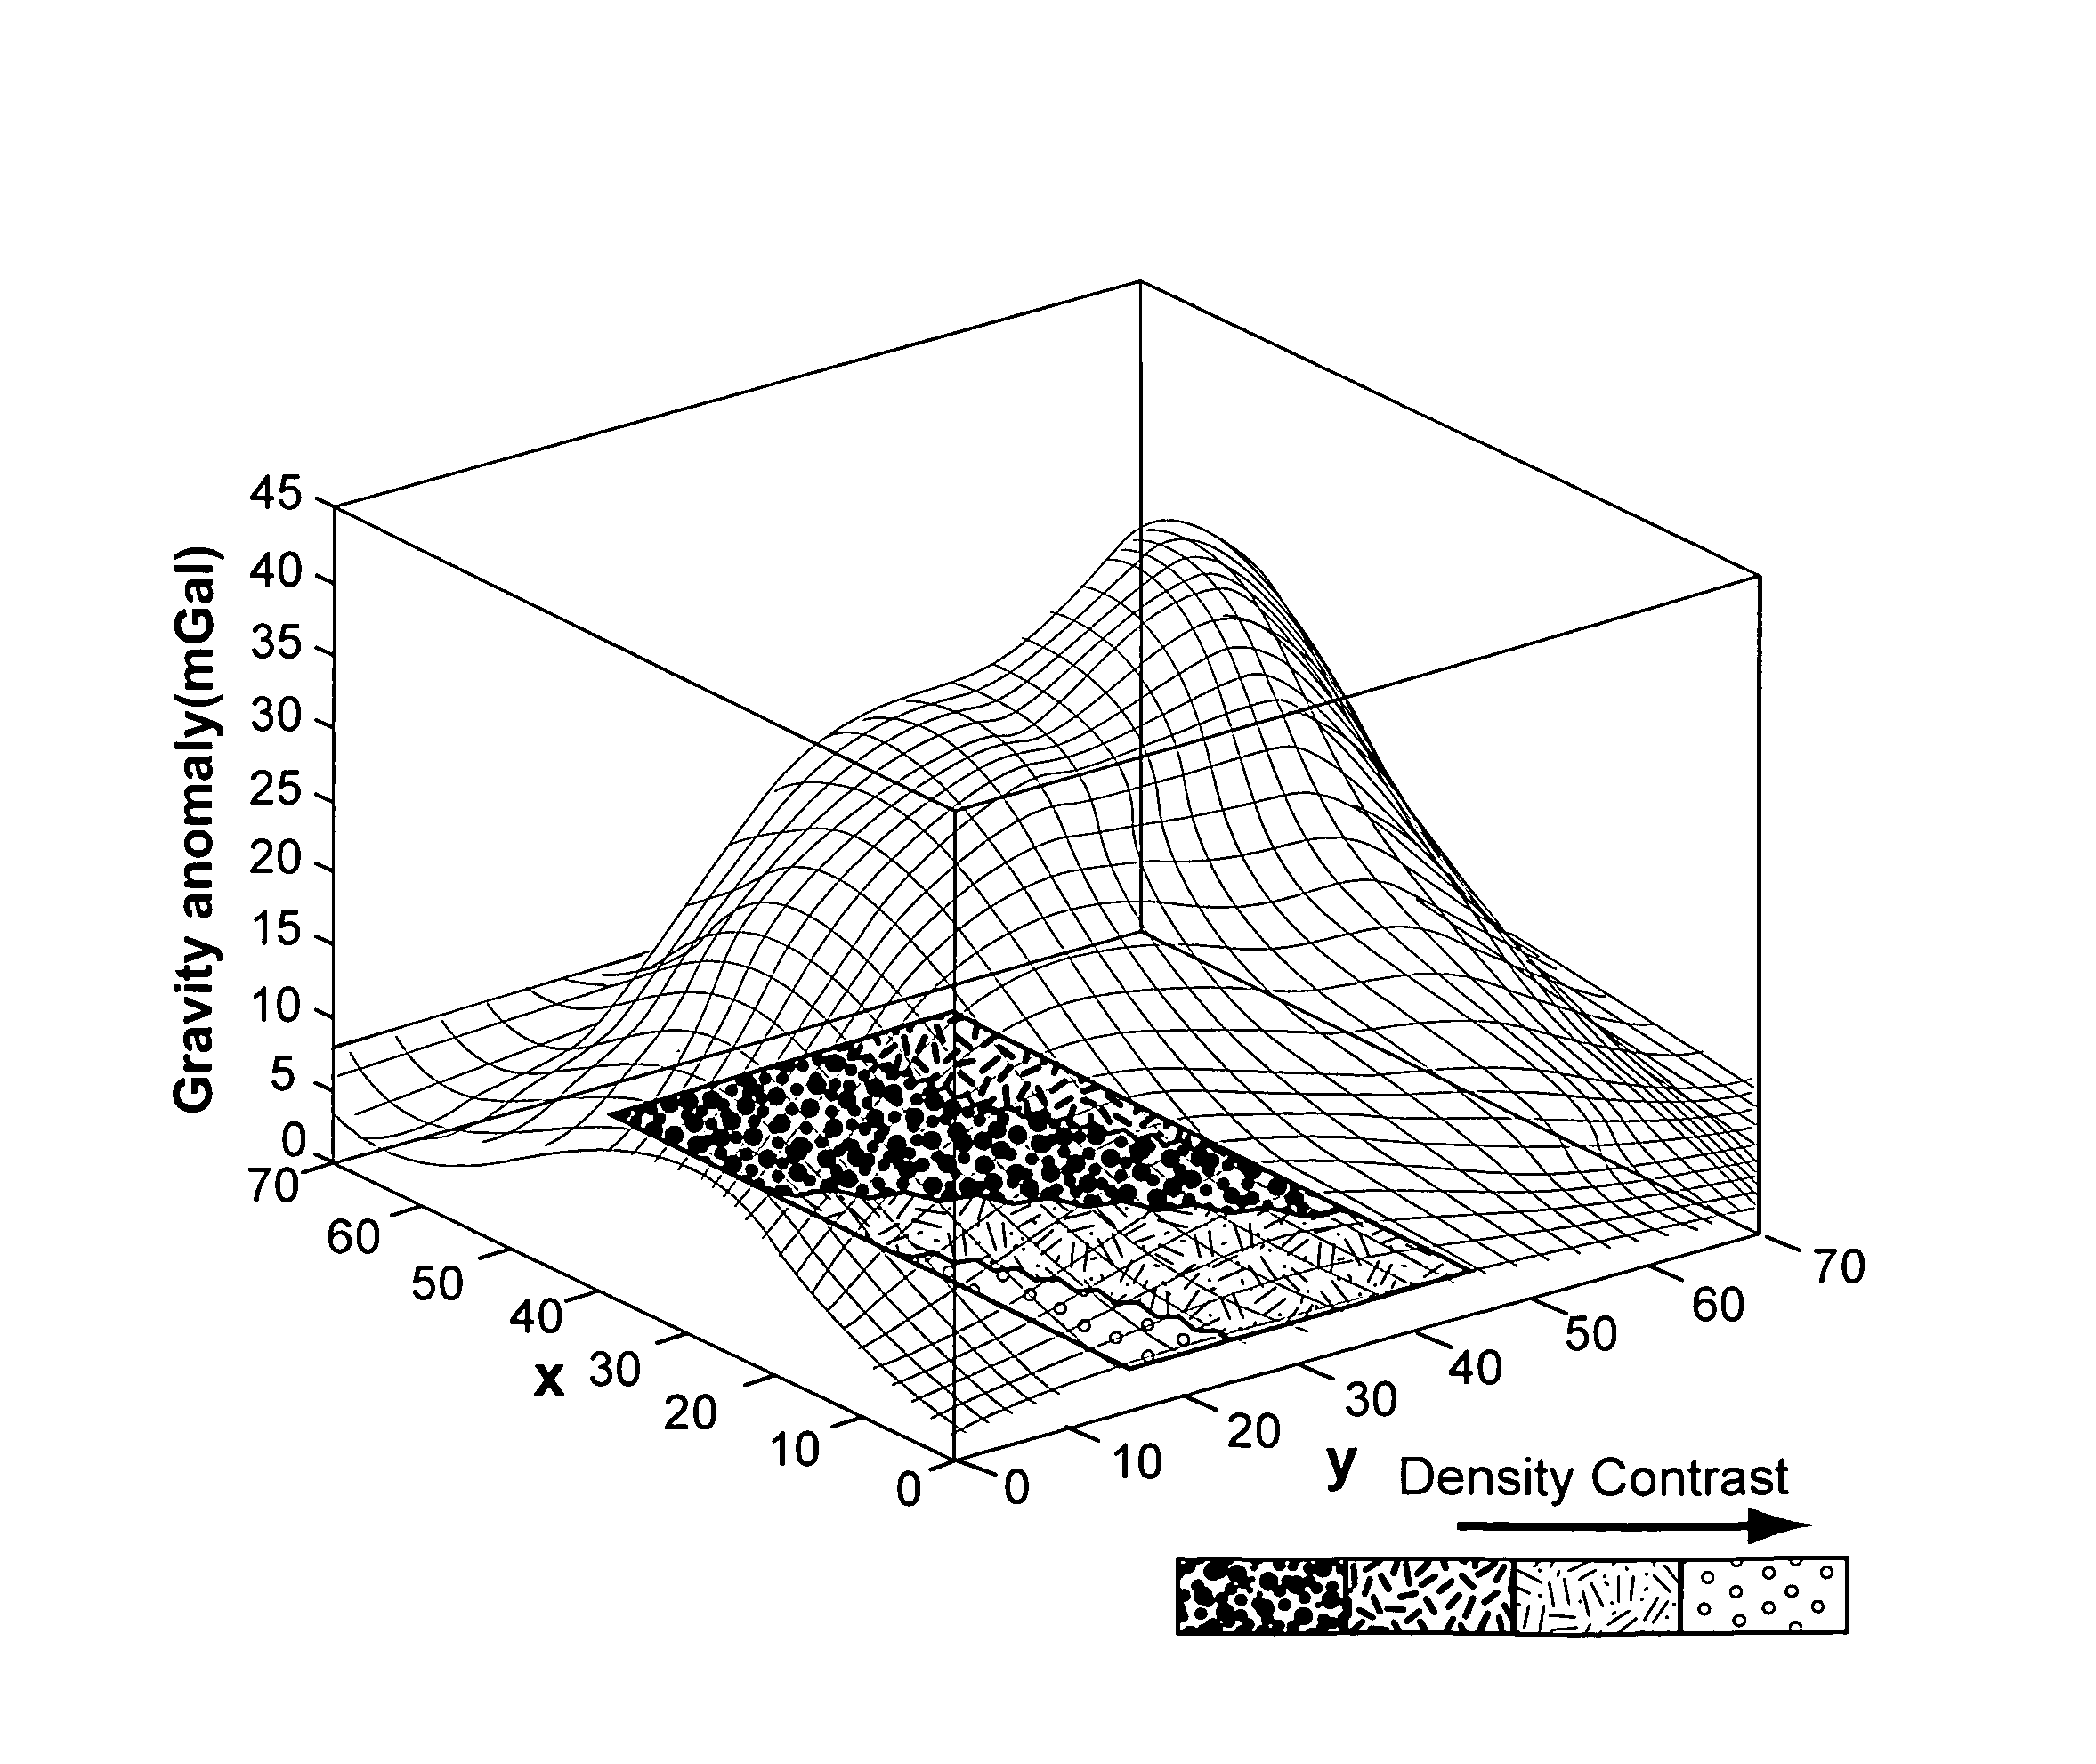 Generation of three dimensional fractal subsurface structure by Voronoi Tessellation and computation of gravity response of such fractal structure